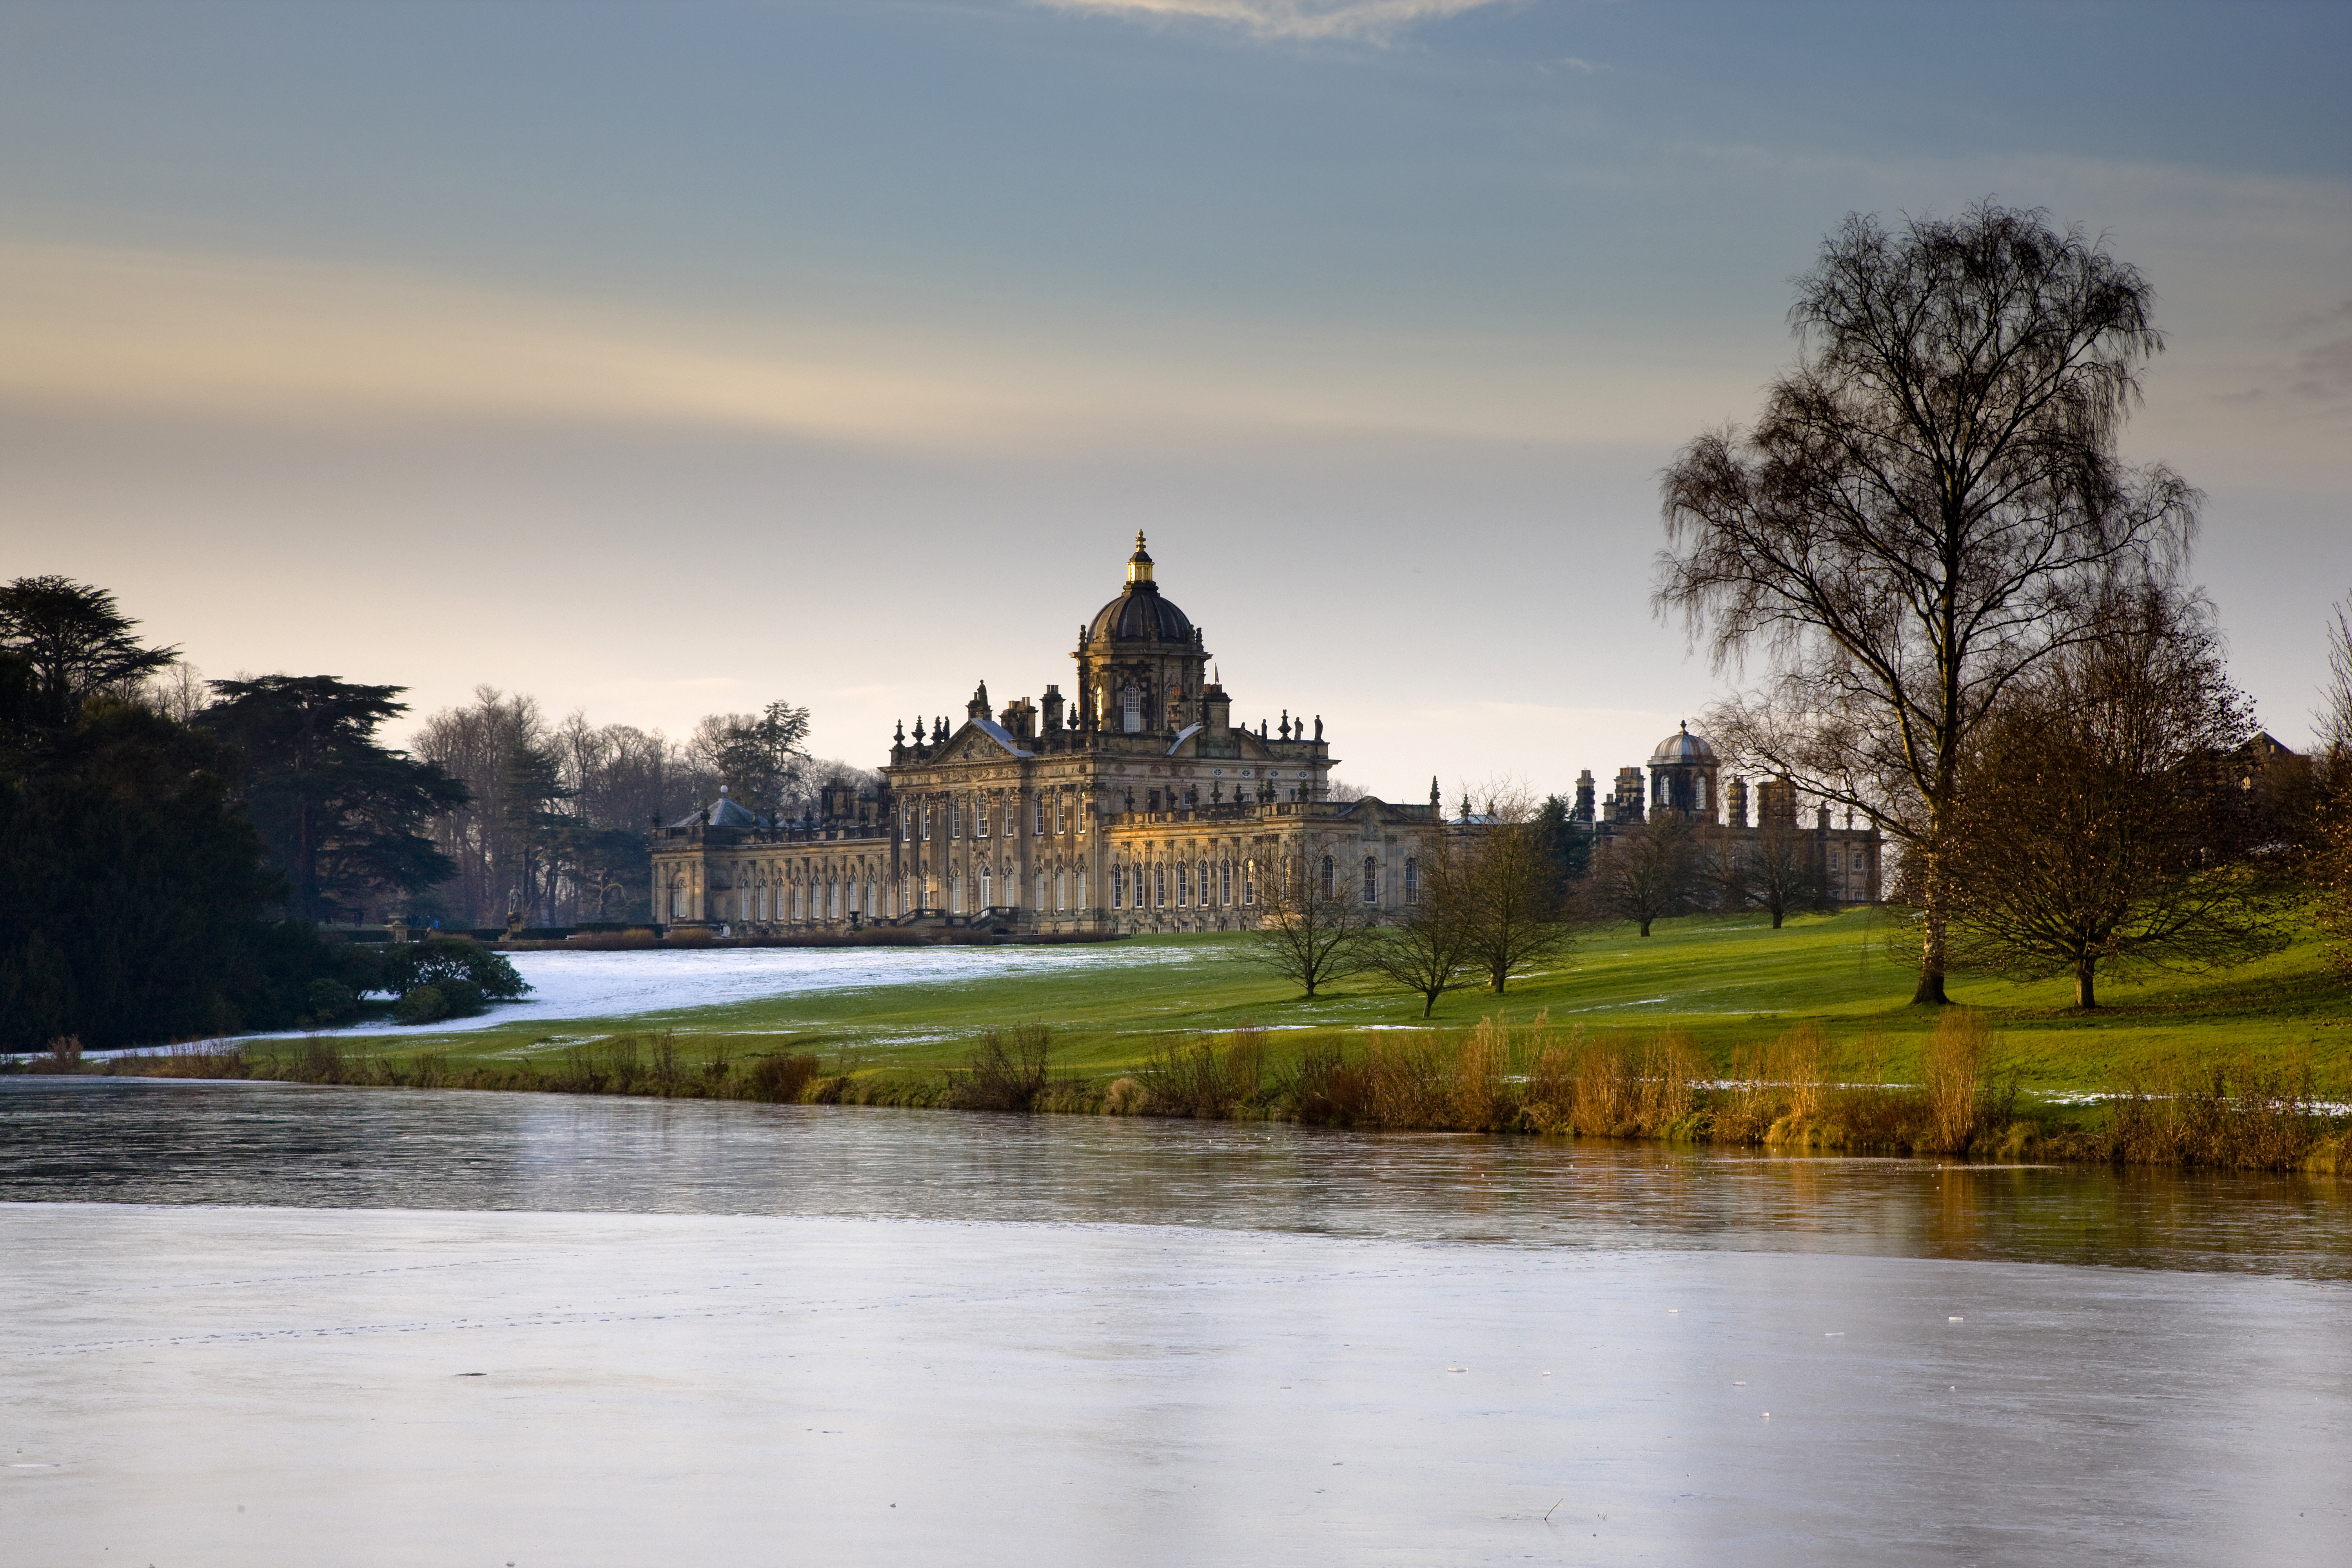 Castle Howard in North Yorkshire.